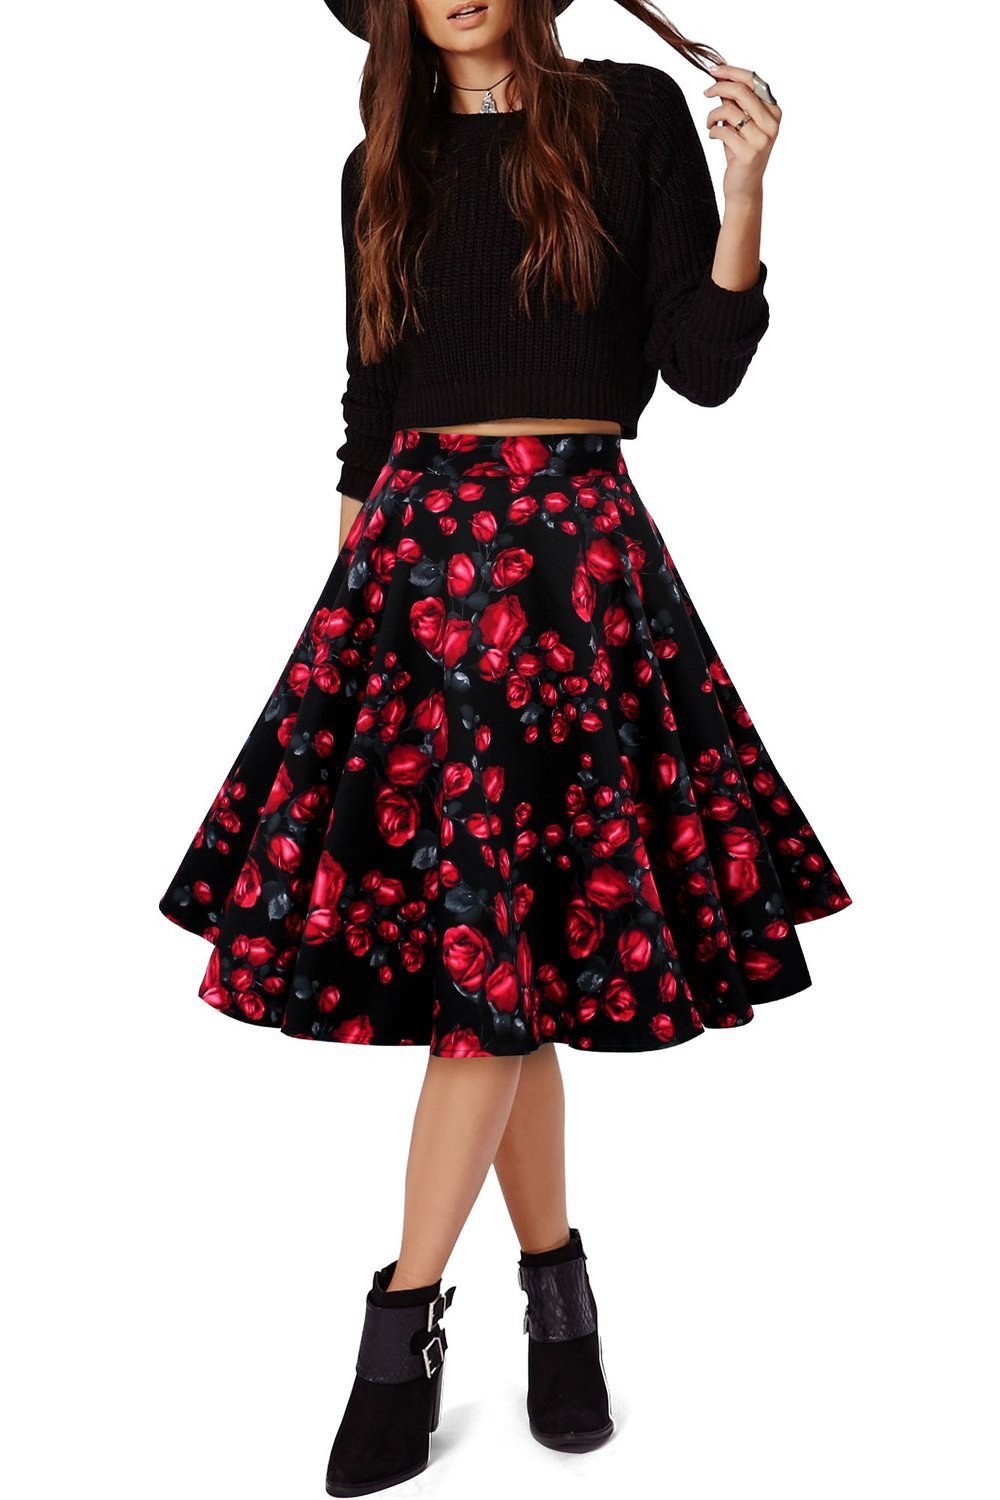 3D Flower Print Flare Ruffled Middle Skirt - Meet Yours Fashion - 1